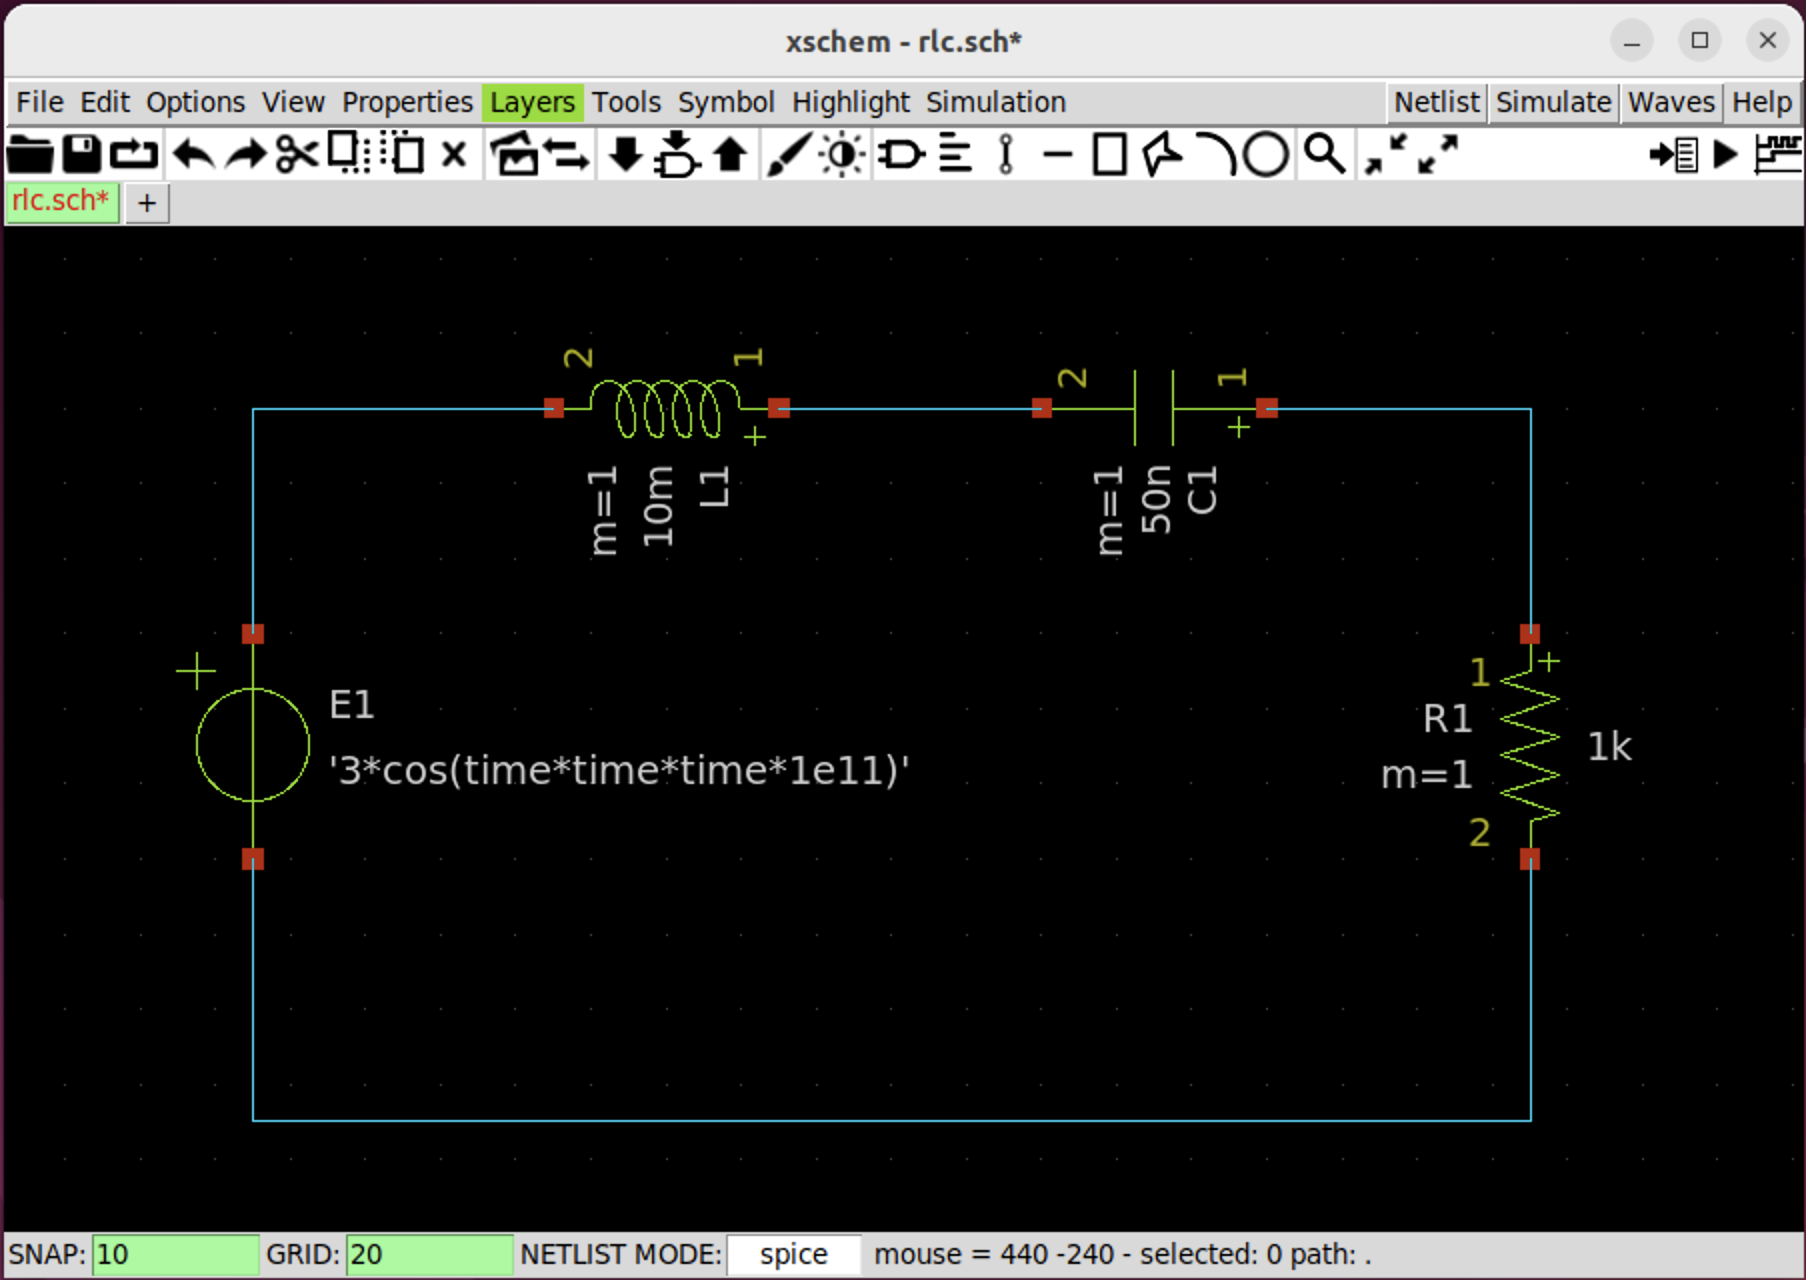 Modifed schematic with inductor and voltage source attribute updated